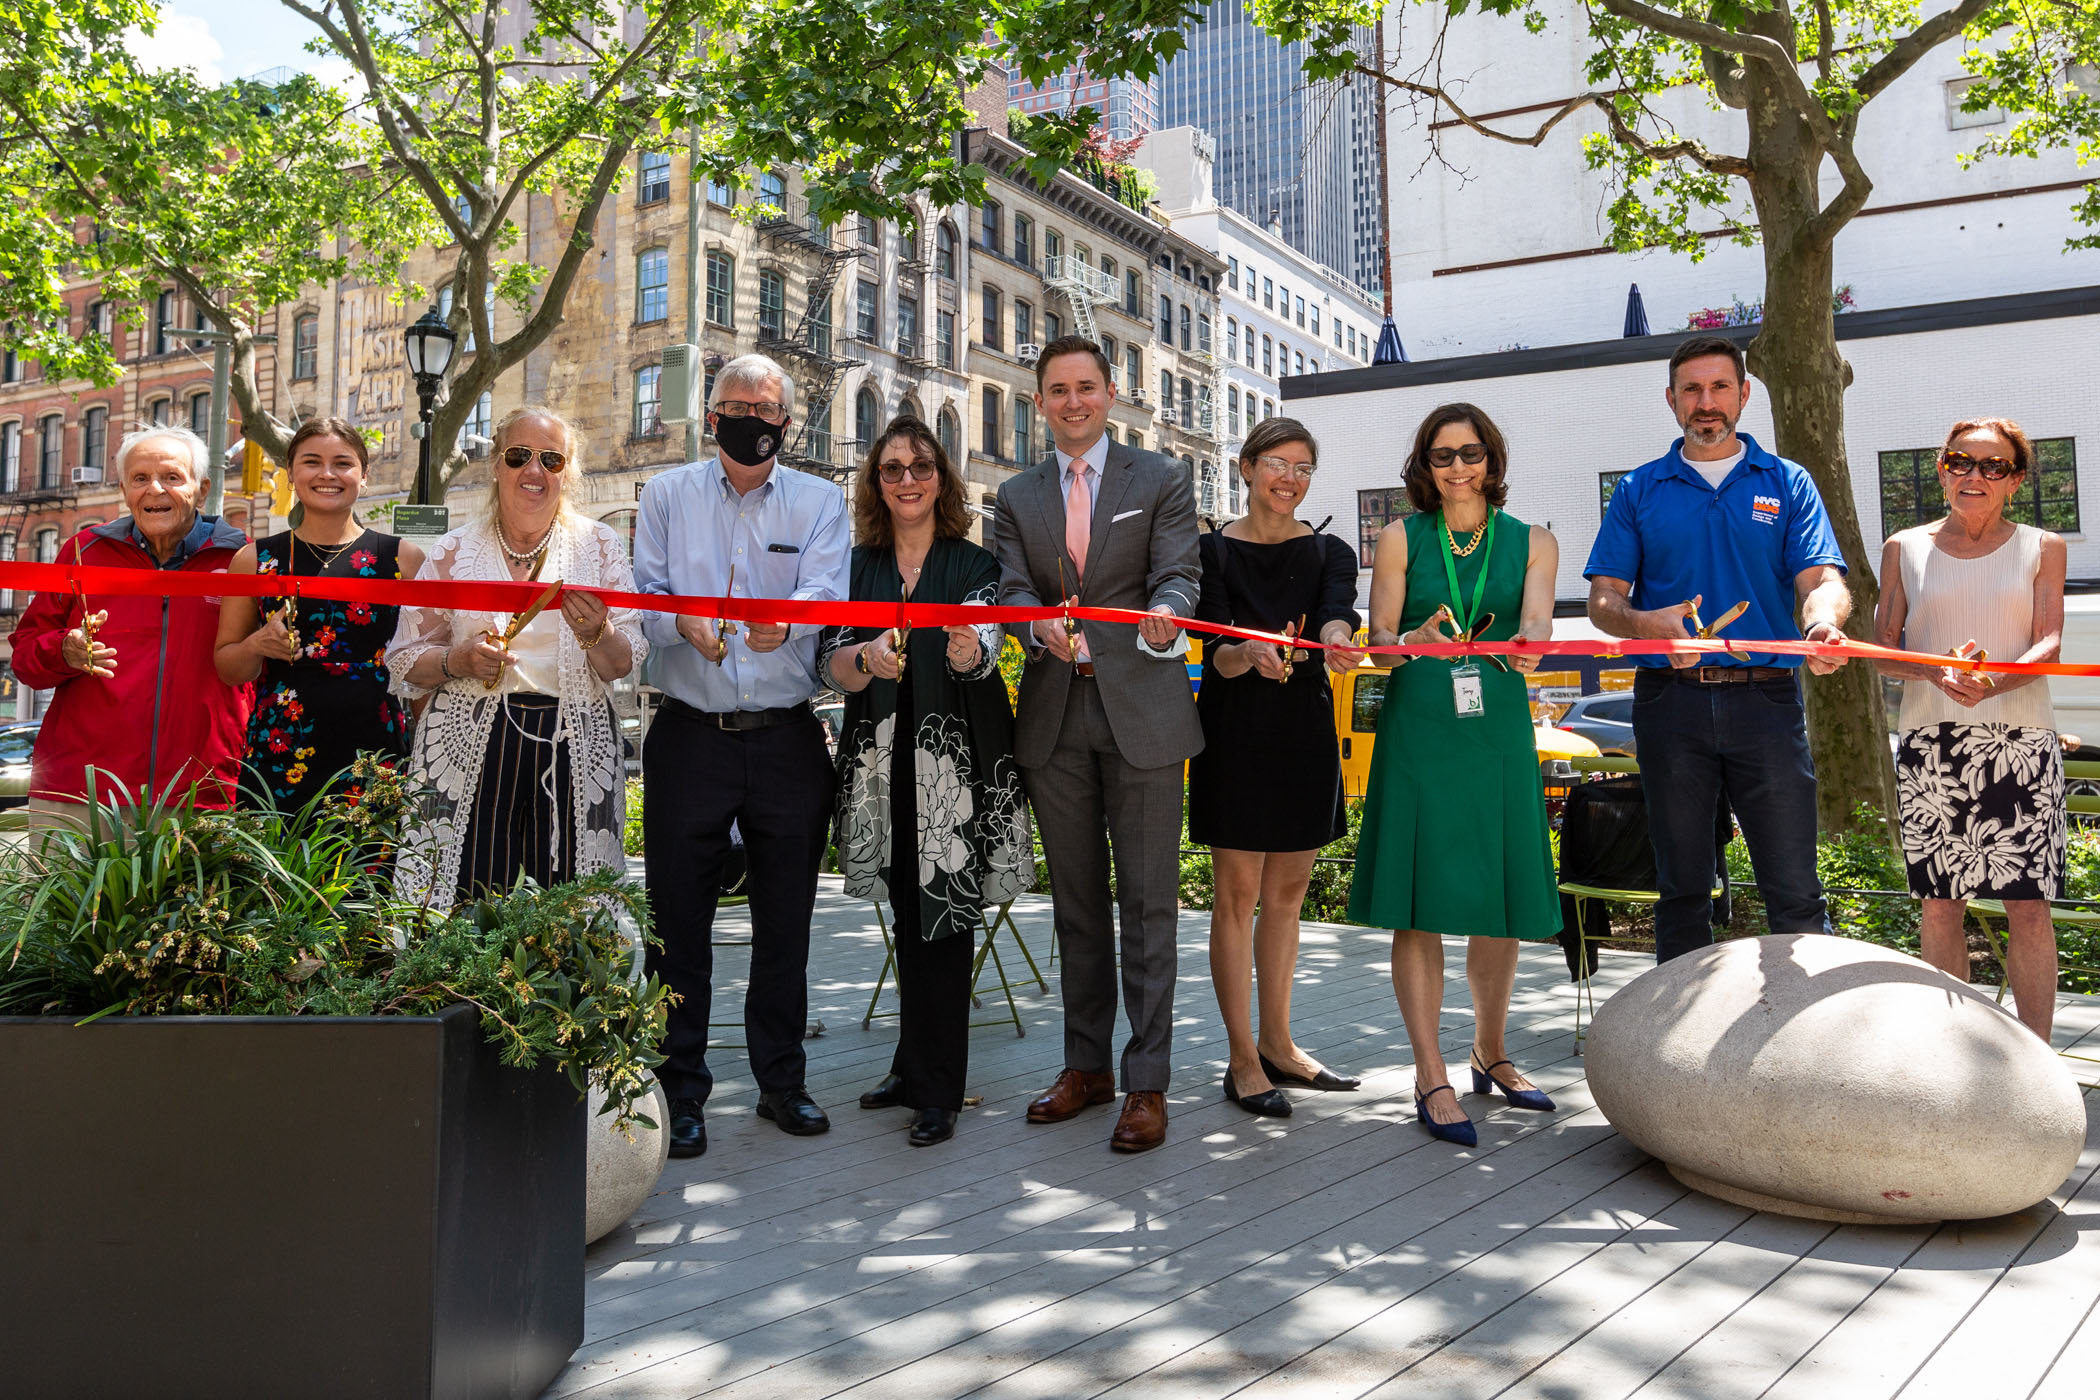 City officials and members of the community join to cut the ribbon at Bogardus Plaza